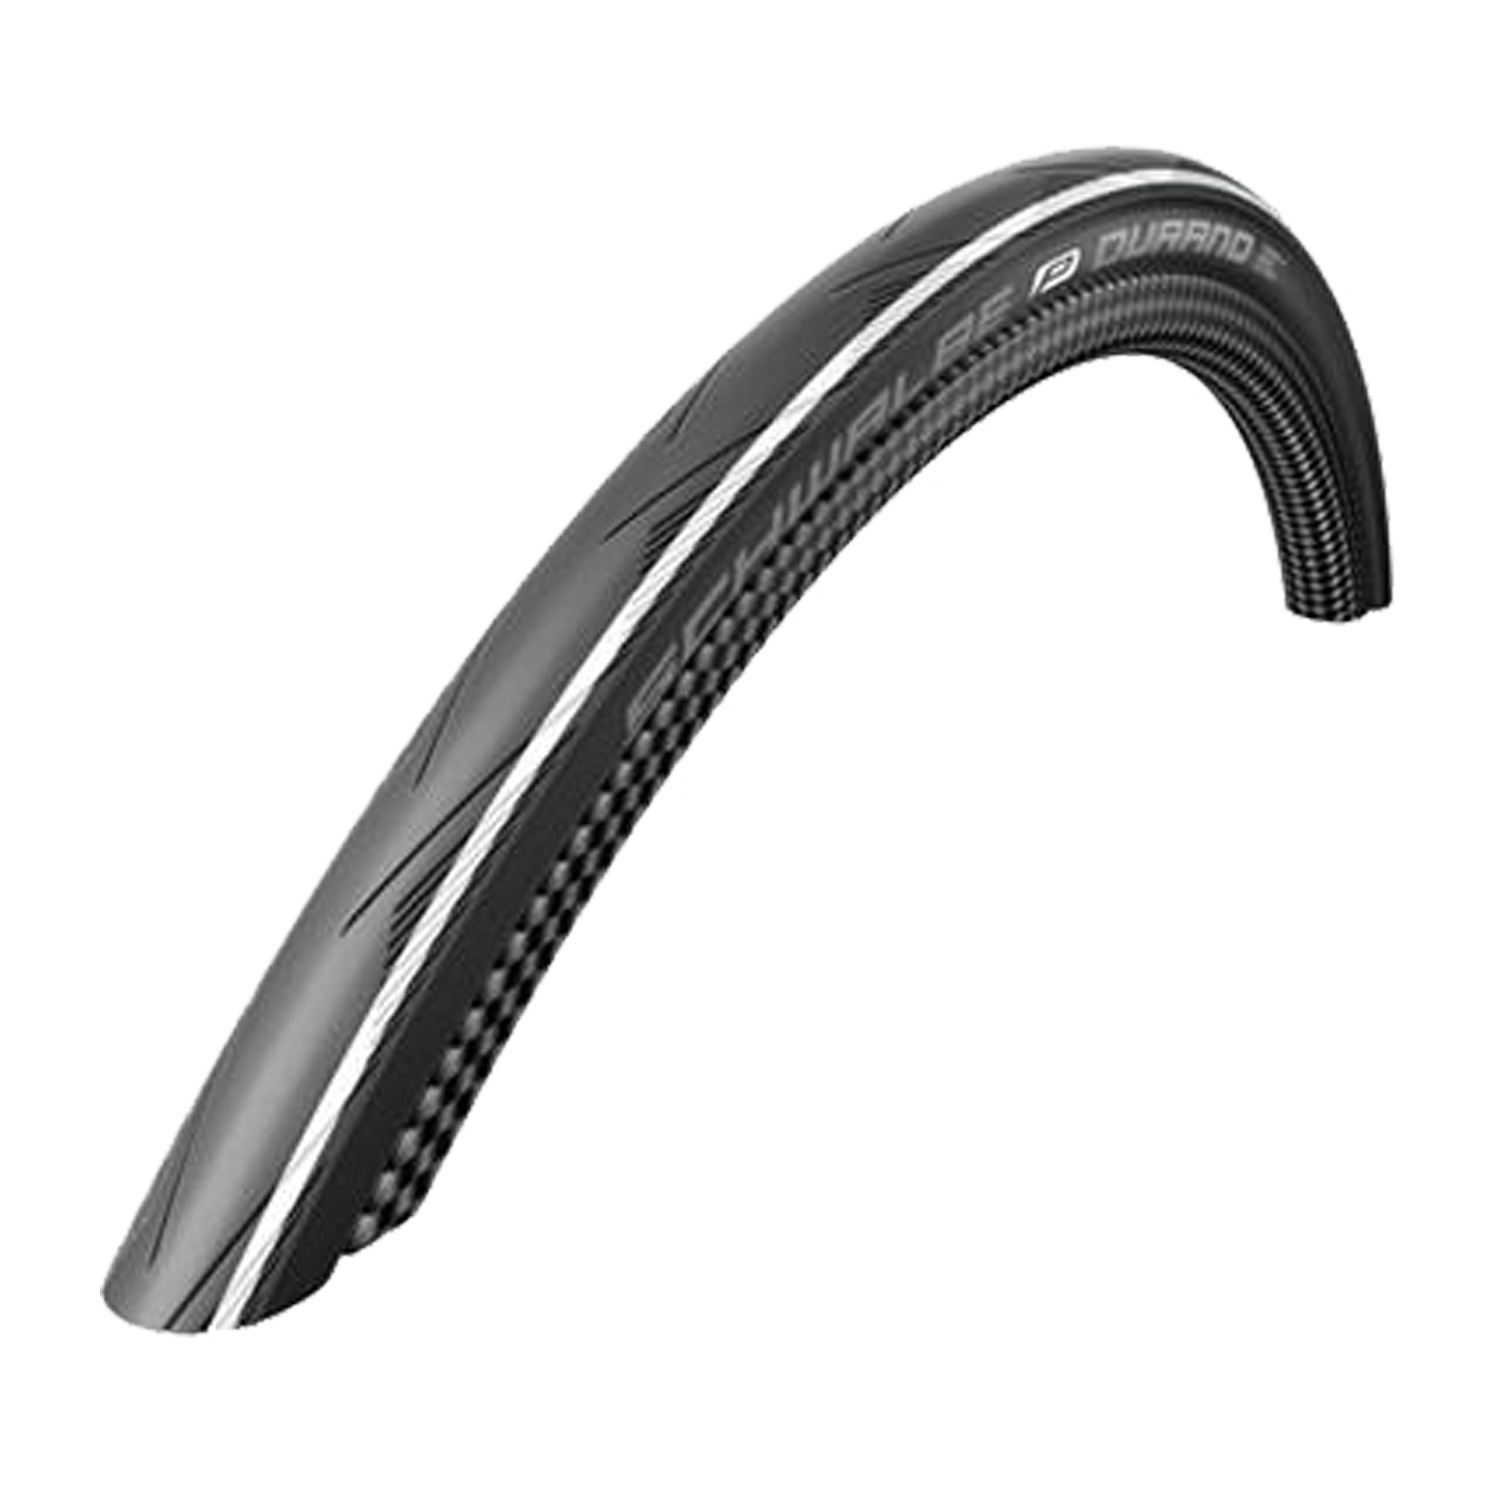 Schwalbe Durano racefiets band